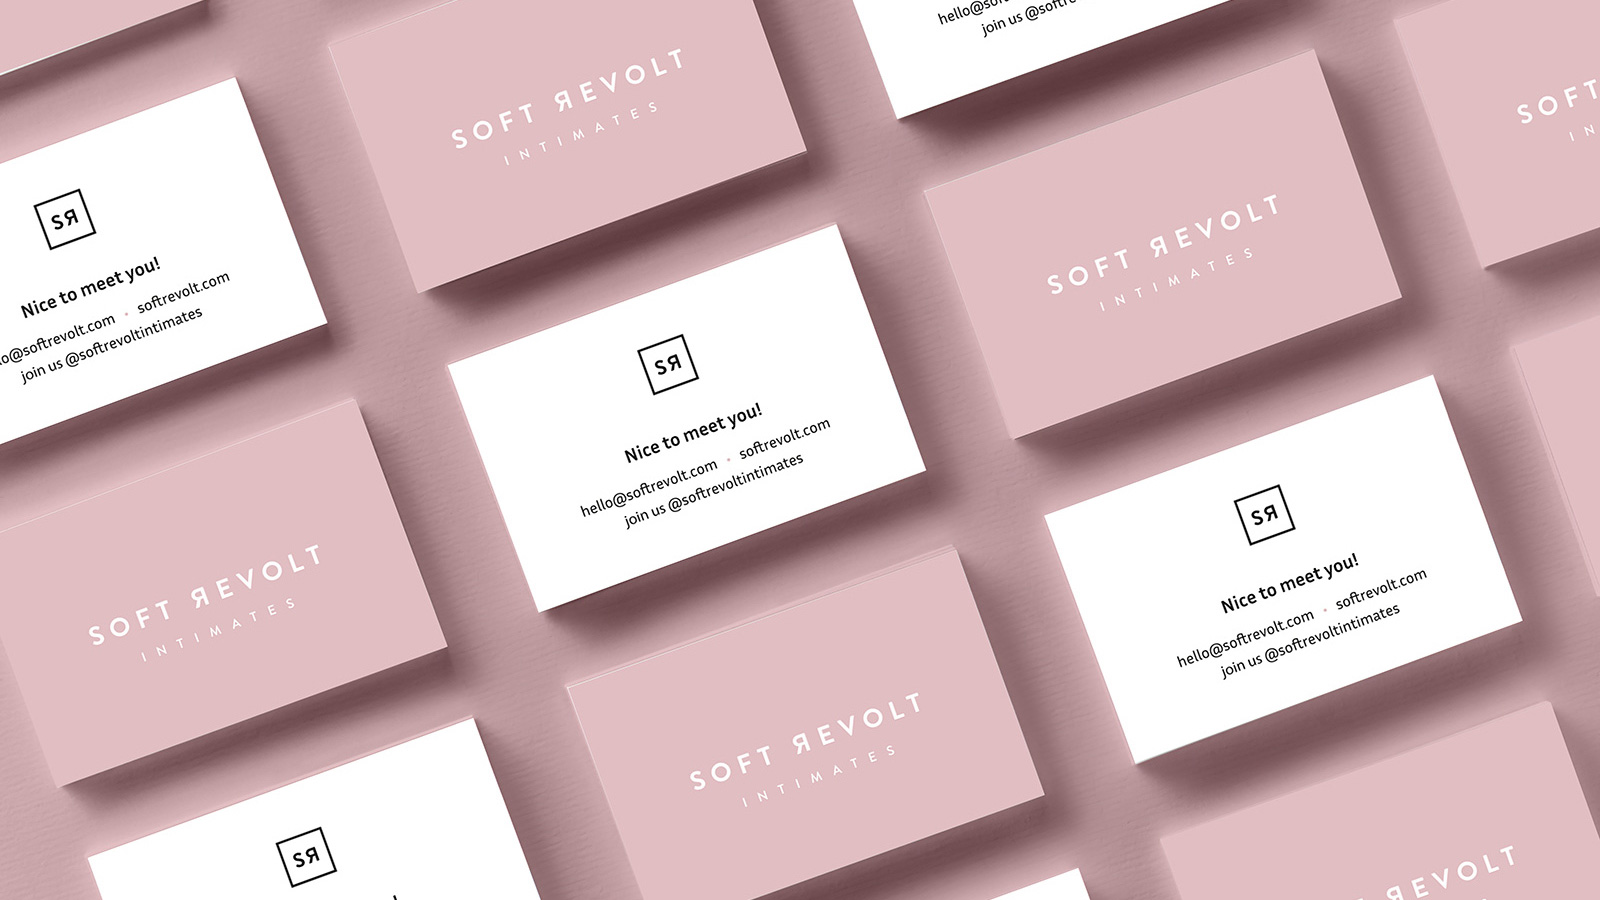 A clean and sustainable brand identity for lingerie company Soft Revolt by Haelsum